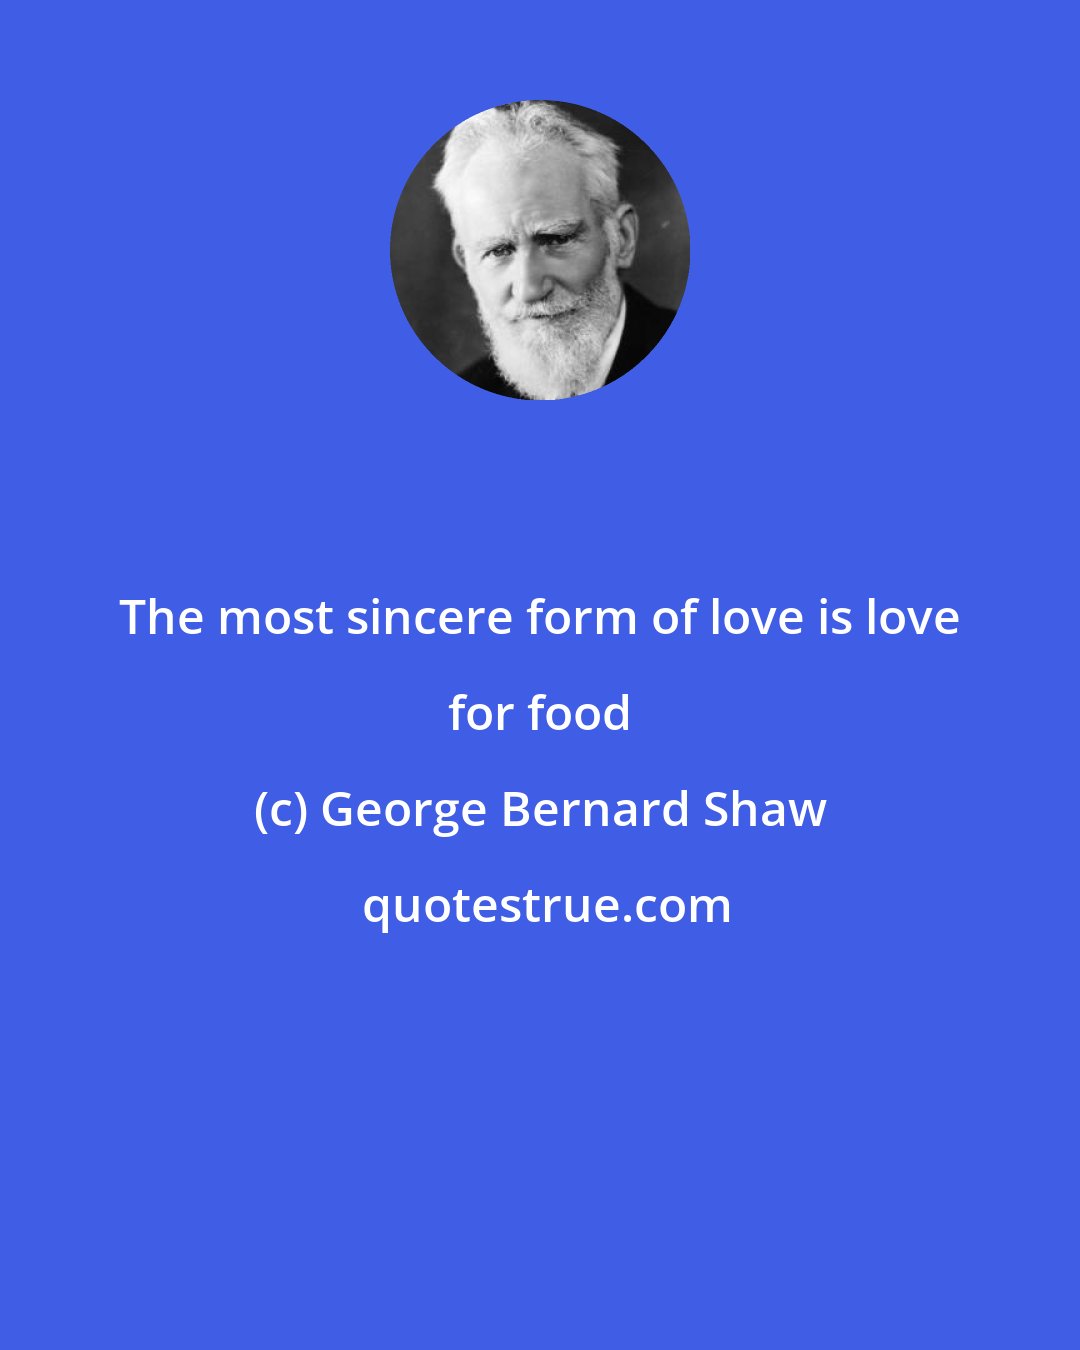 George Bernard Shaw: The most sincere form of love is love for food